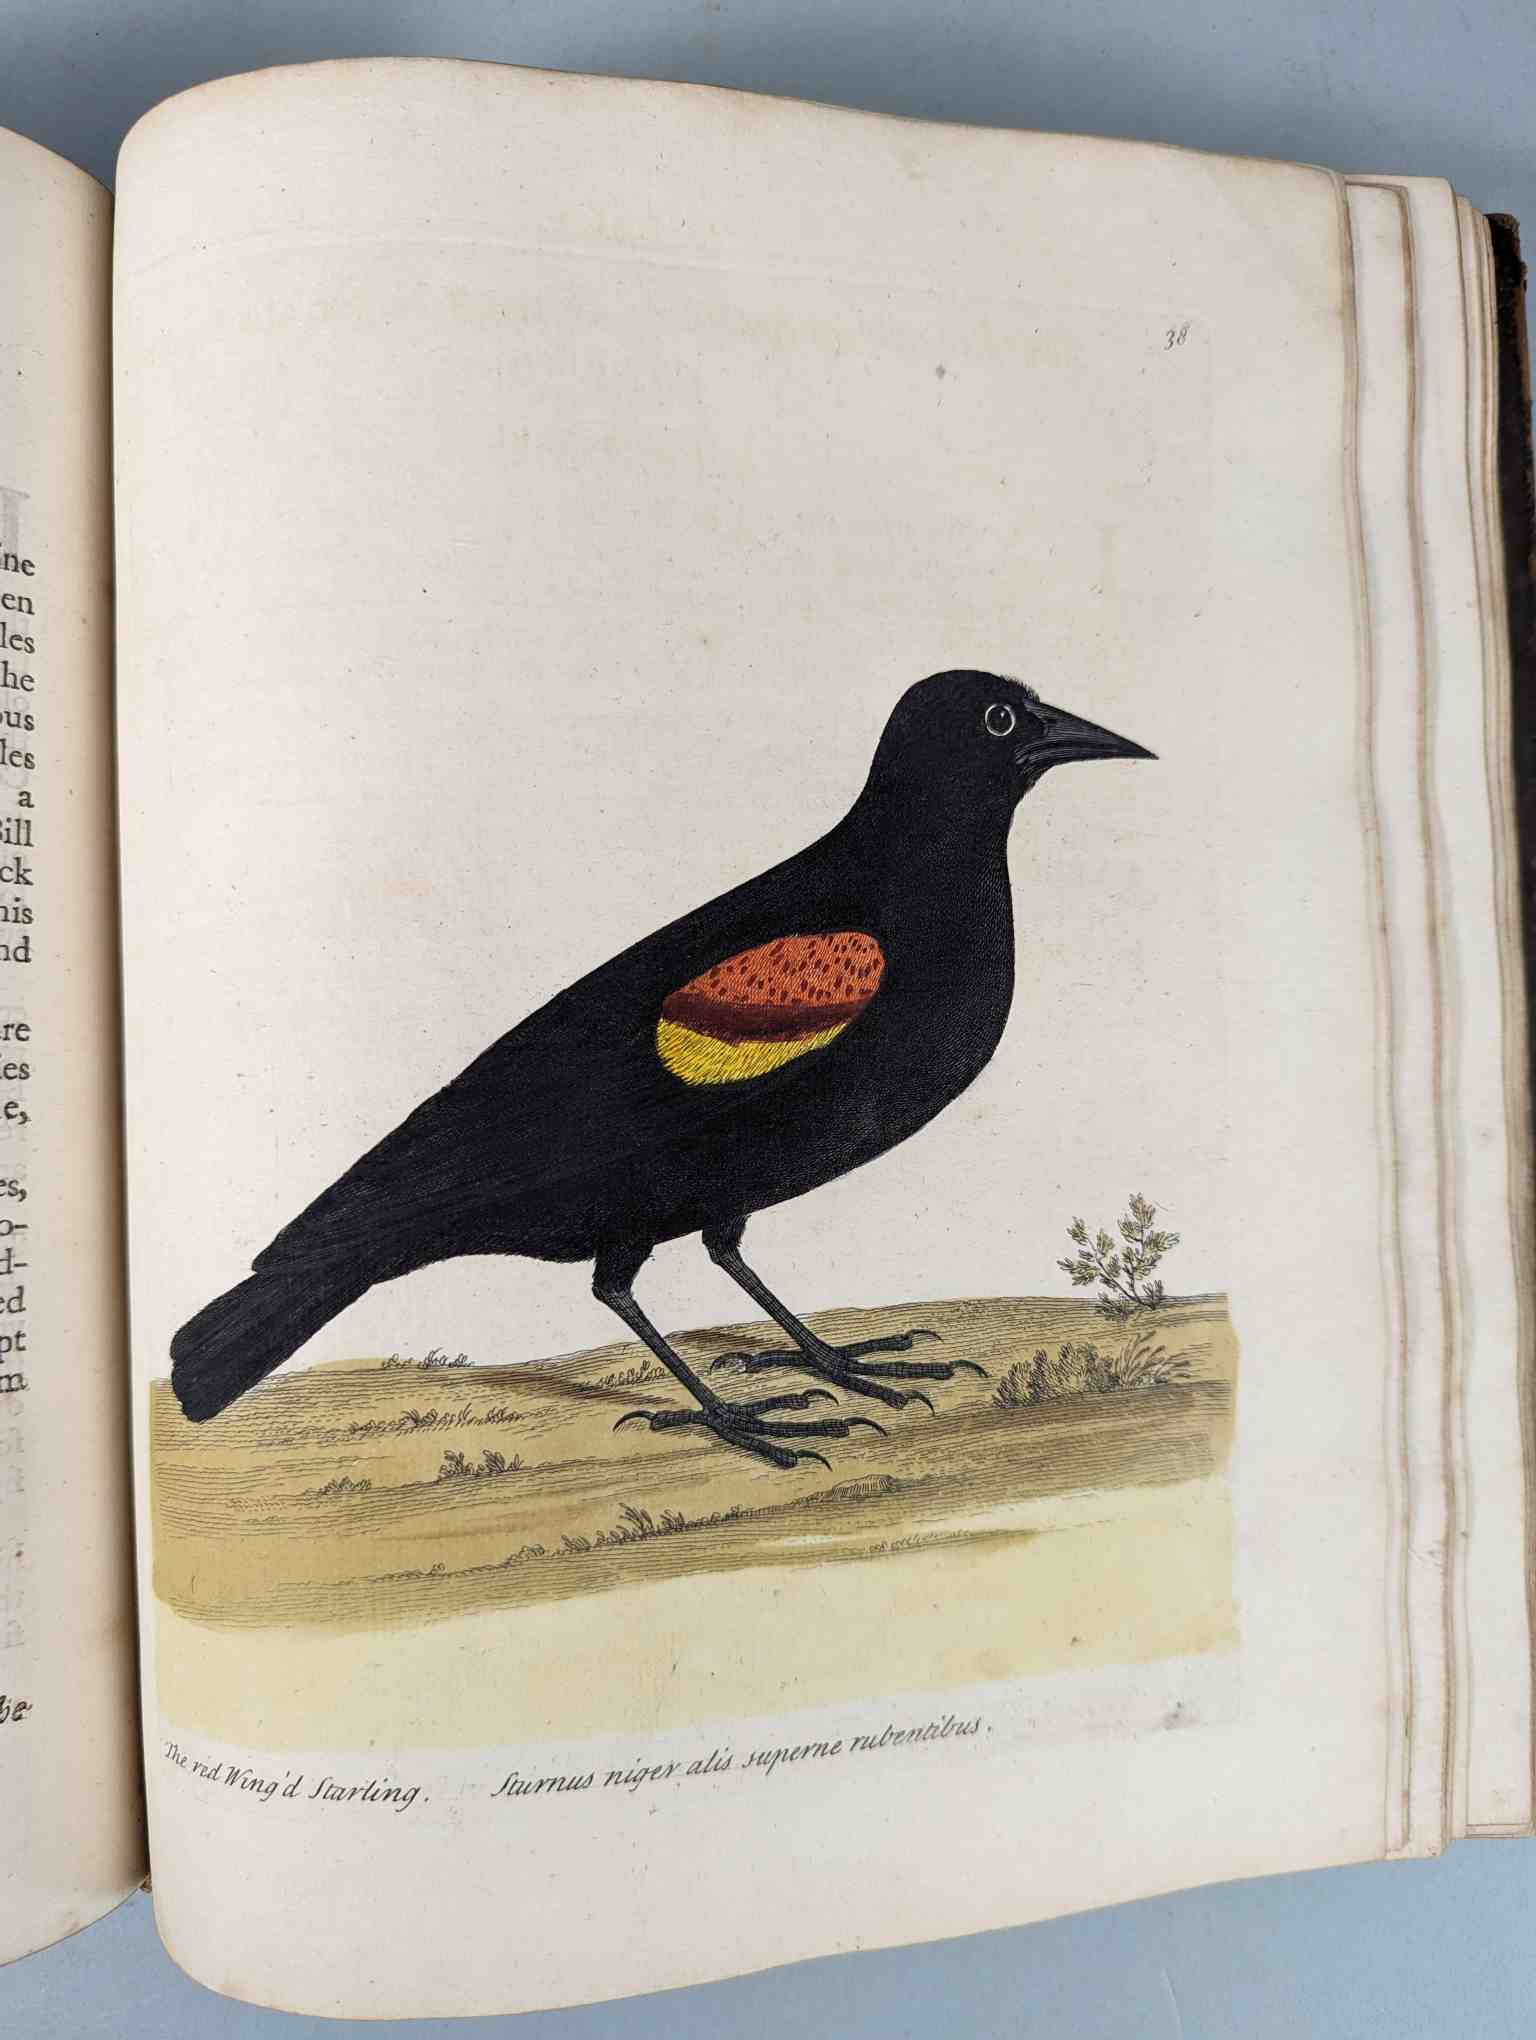 ALBIN, Eleazar. A Natural History of Birds, to which are added, Notes and Observations by W. - Image 41 of 208